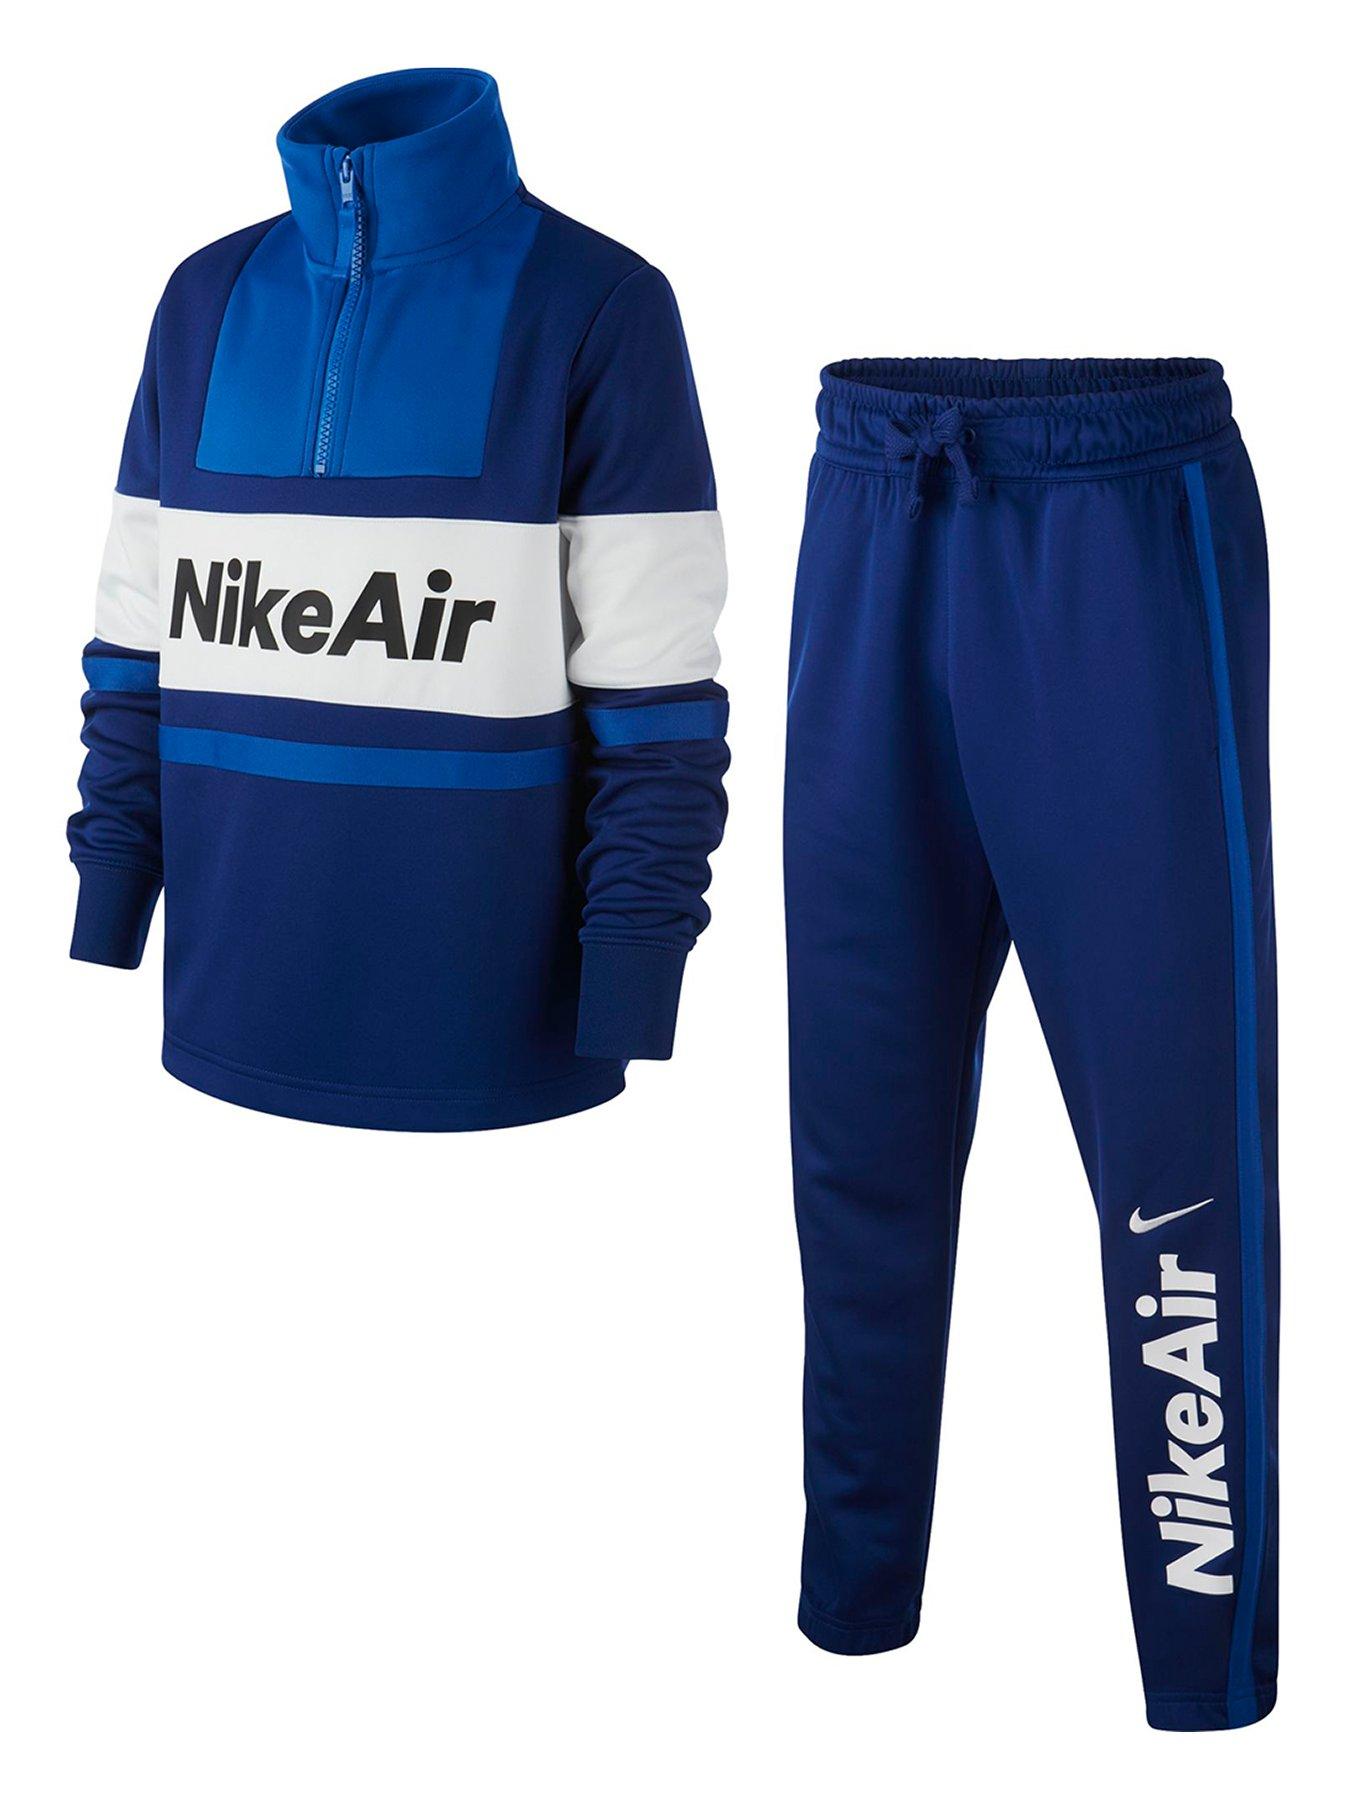 royal blue nike outfit